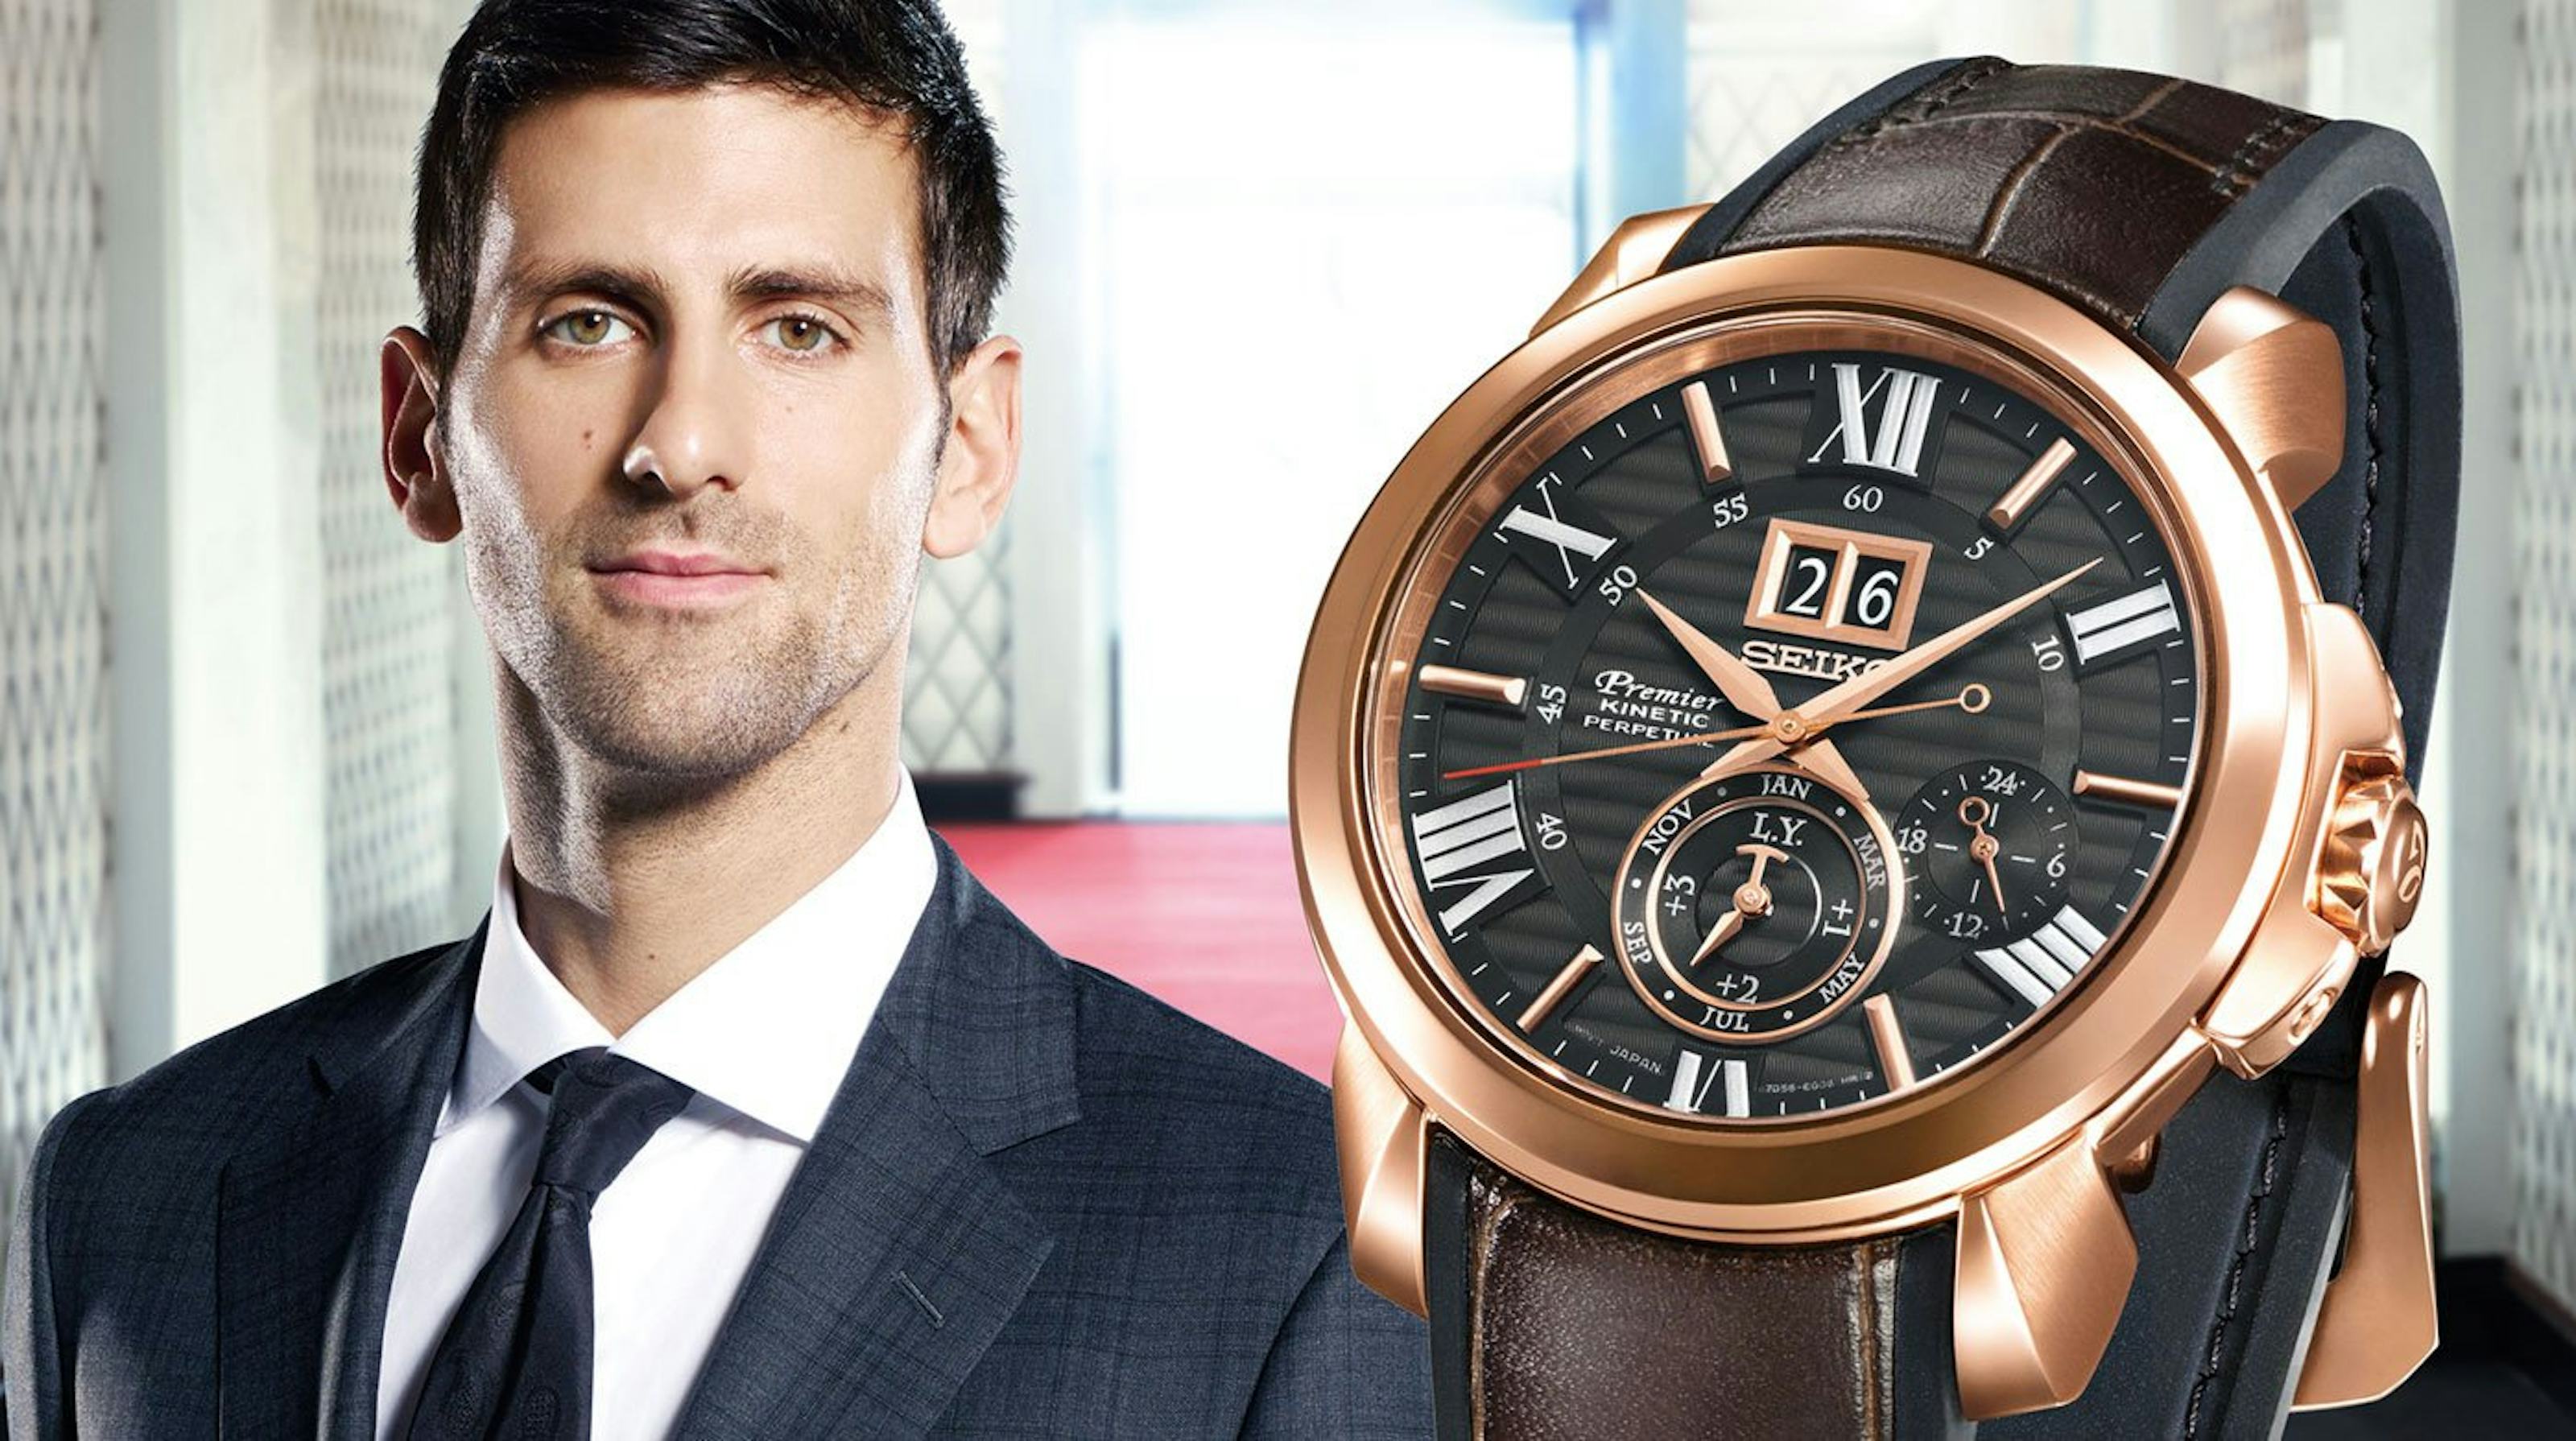 Tennis Stars and Their Watches: The French Open Watch Spotting | WatchBox